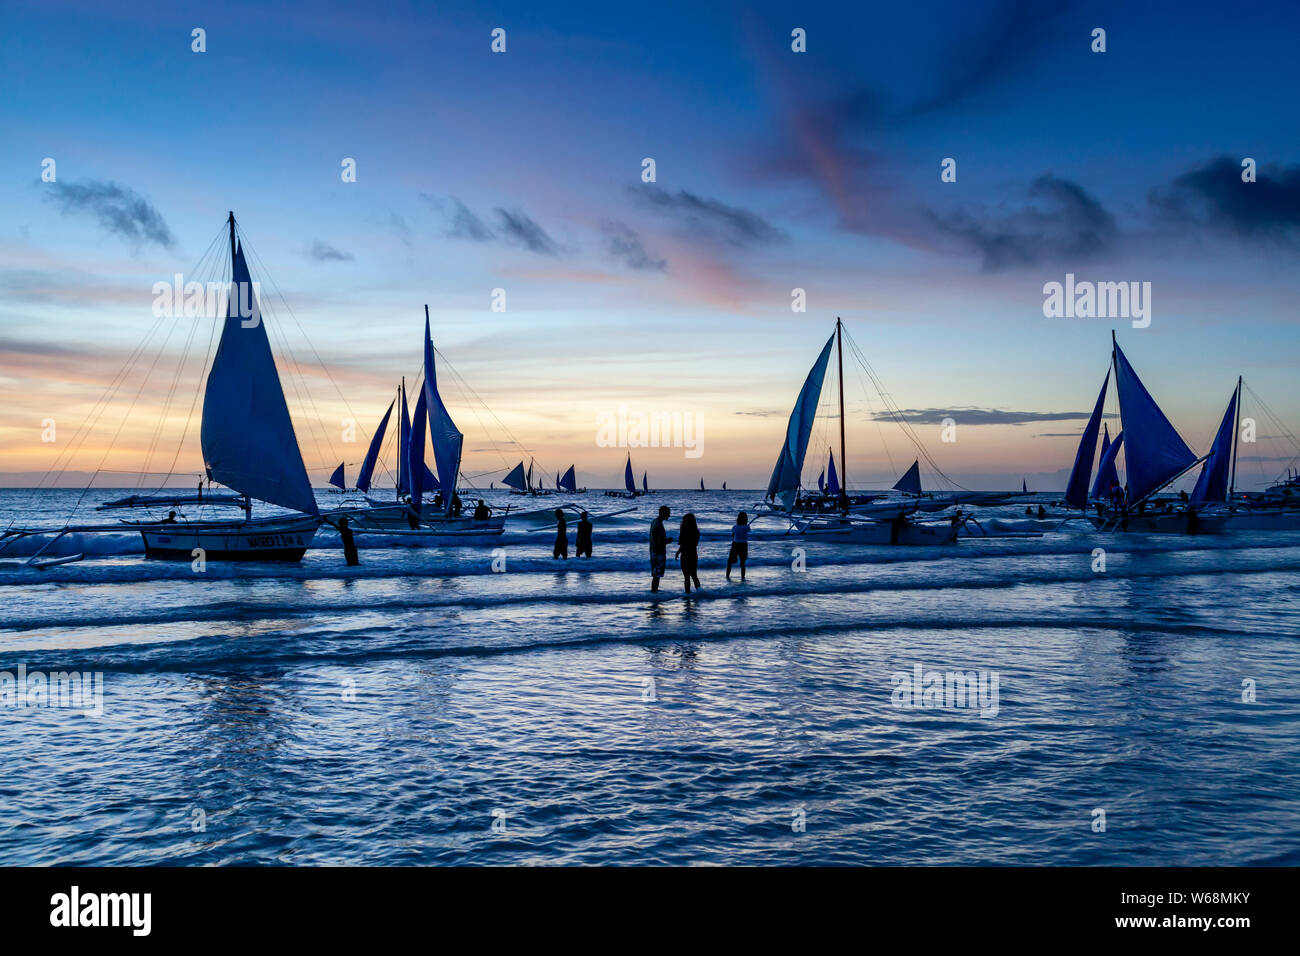 Traditional Paraws (Sailing Boats) On A Sunset Cruise off White Beach, Boracay, Aklan Province, The Philippines. Stock Photo